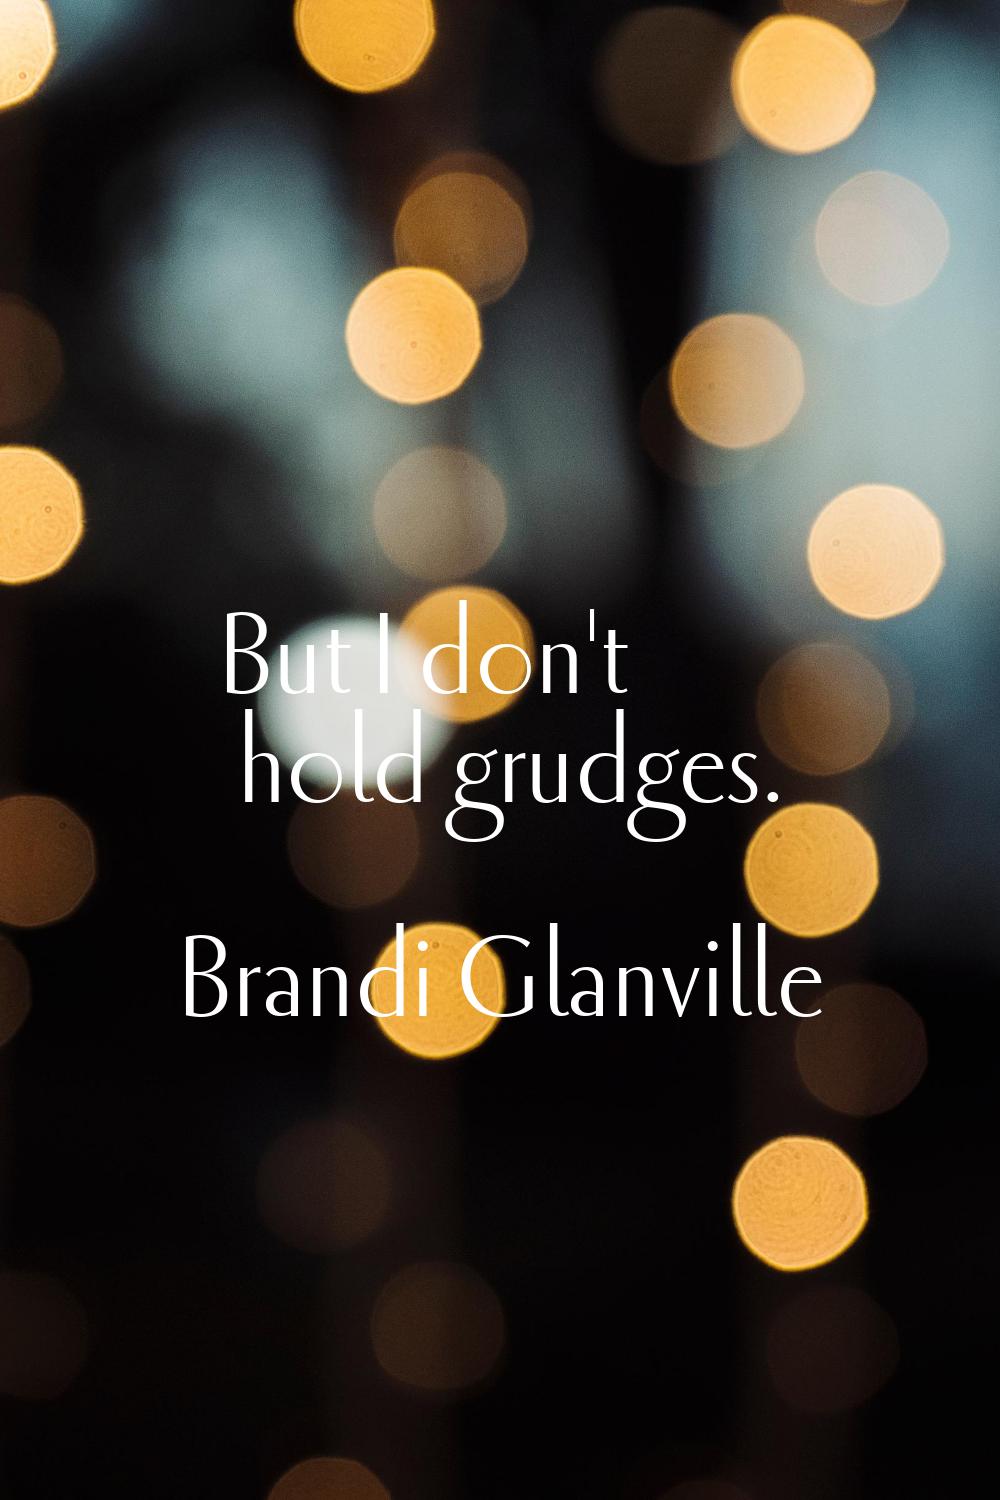 But I don't hold grudges.